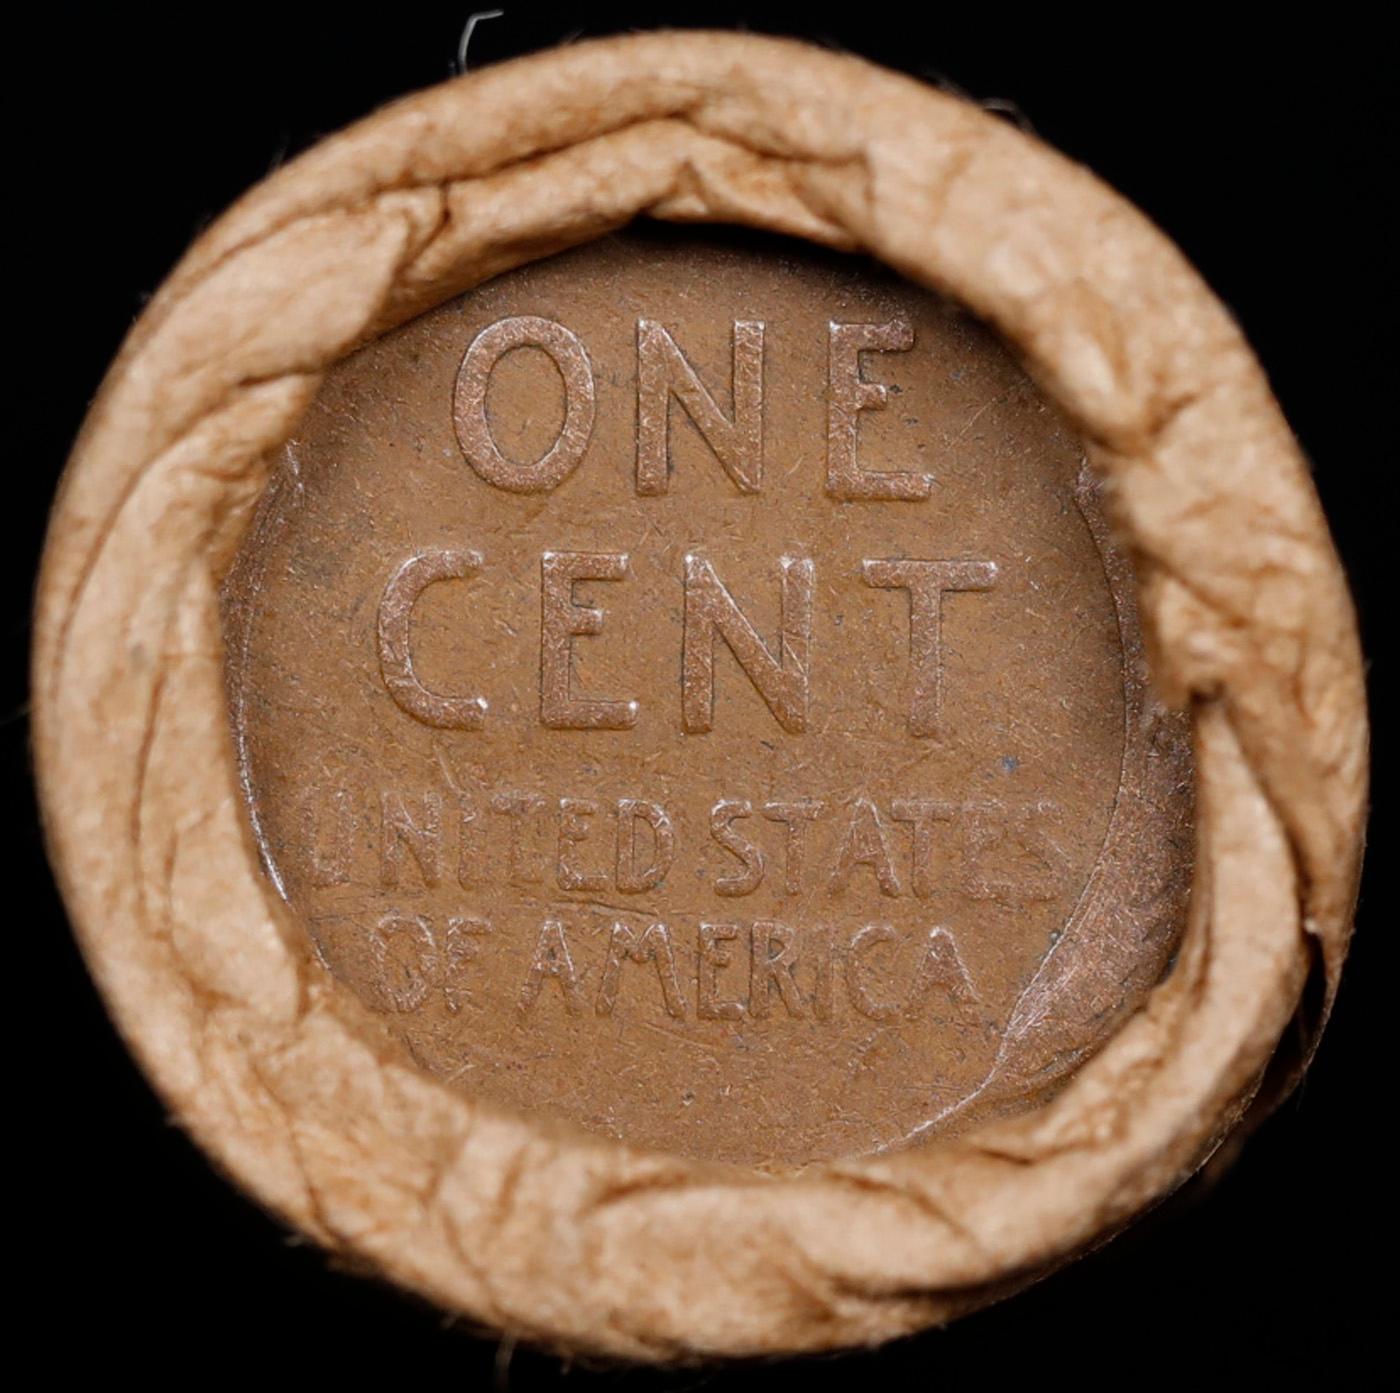 Lincoln Wheat Cent 1c Mixed Roll Orig Brandt McDonalds Wrapper, 1916-d end, Wheat other end